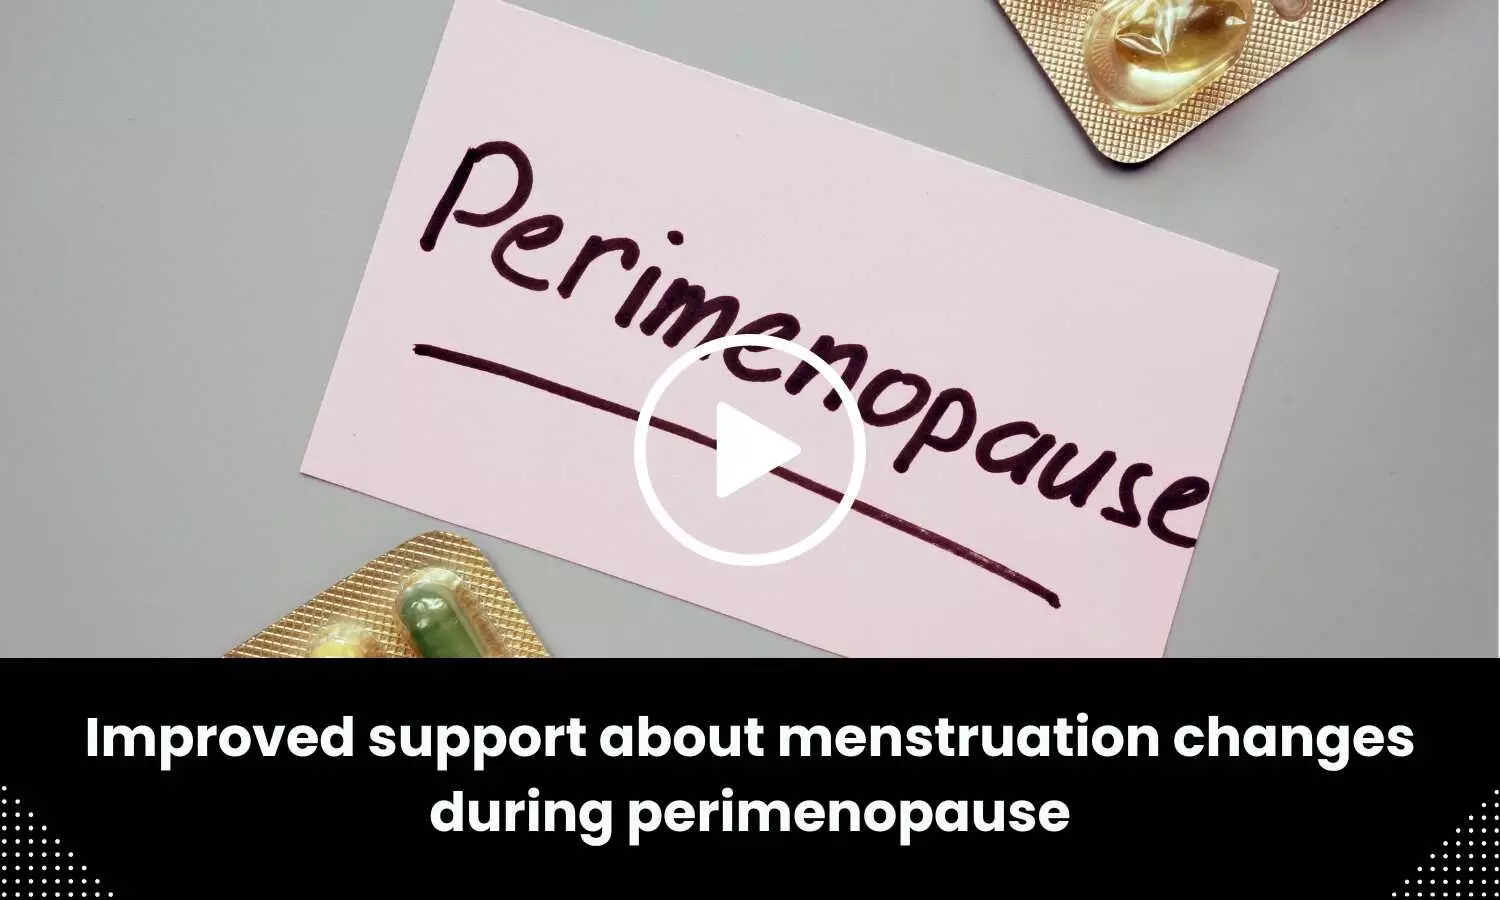 Improved support about menstruation changes during perimenopause